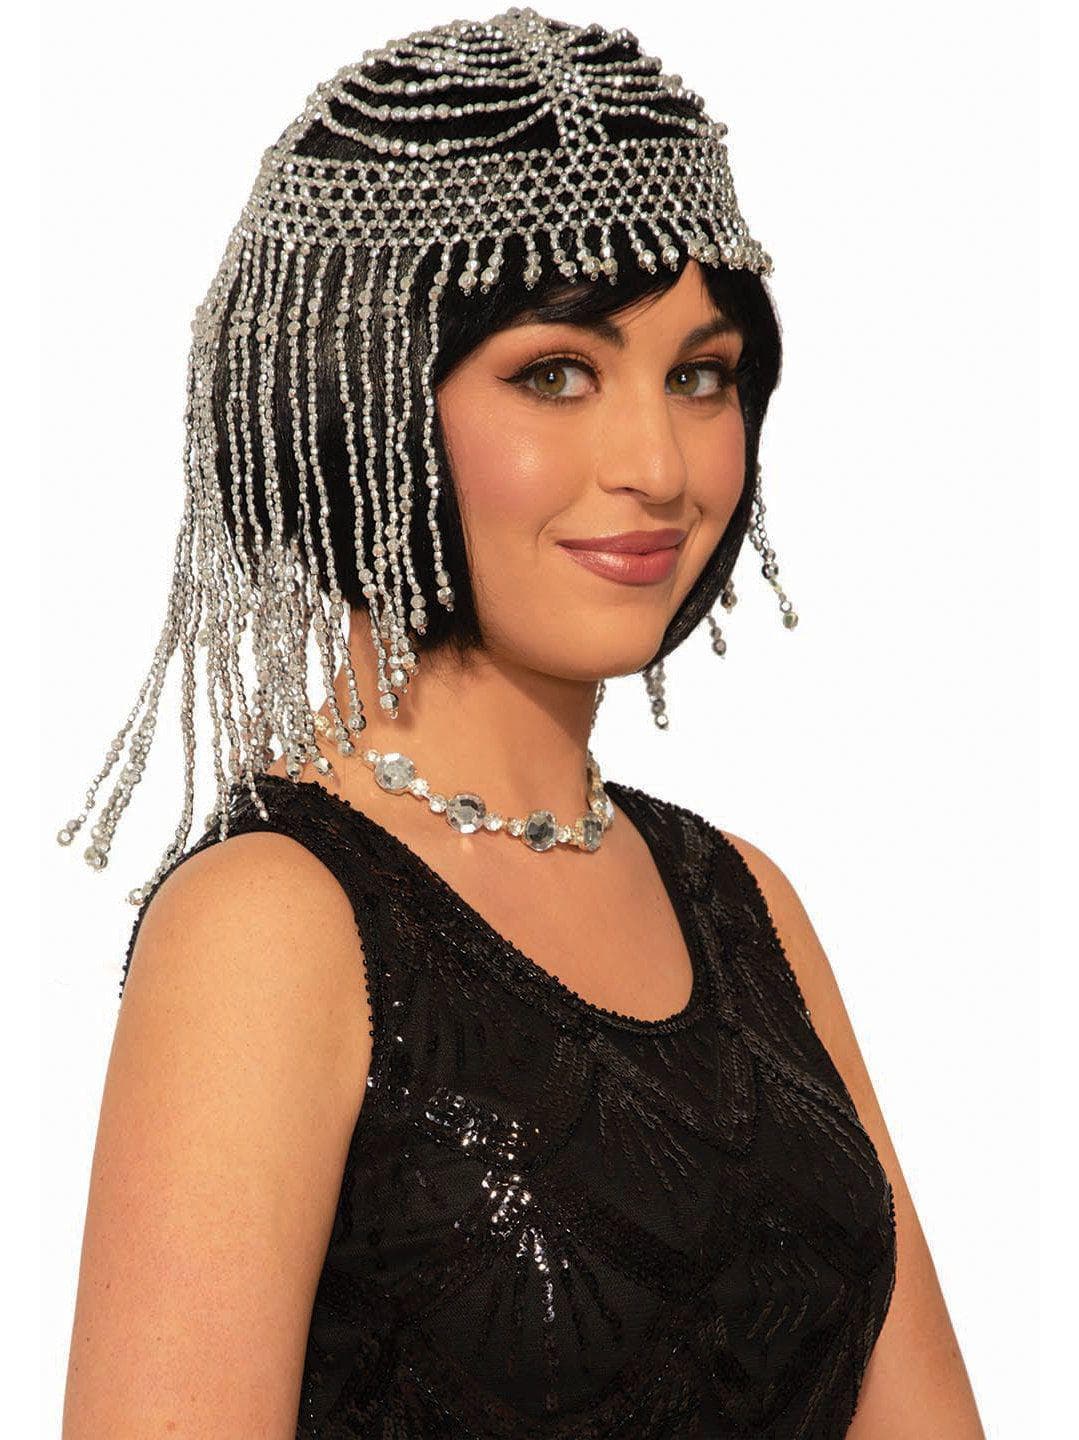 20's Silver Headpiece with Beads - costumes.com